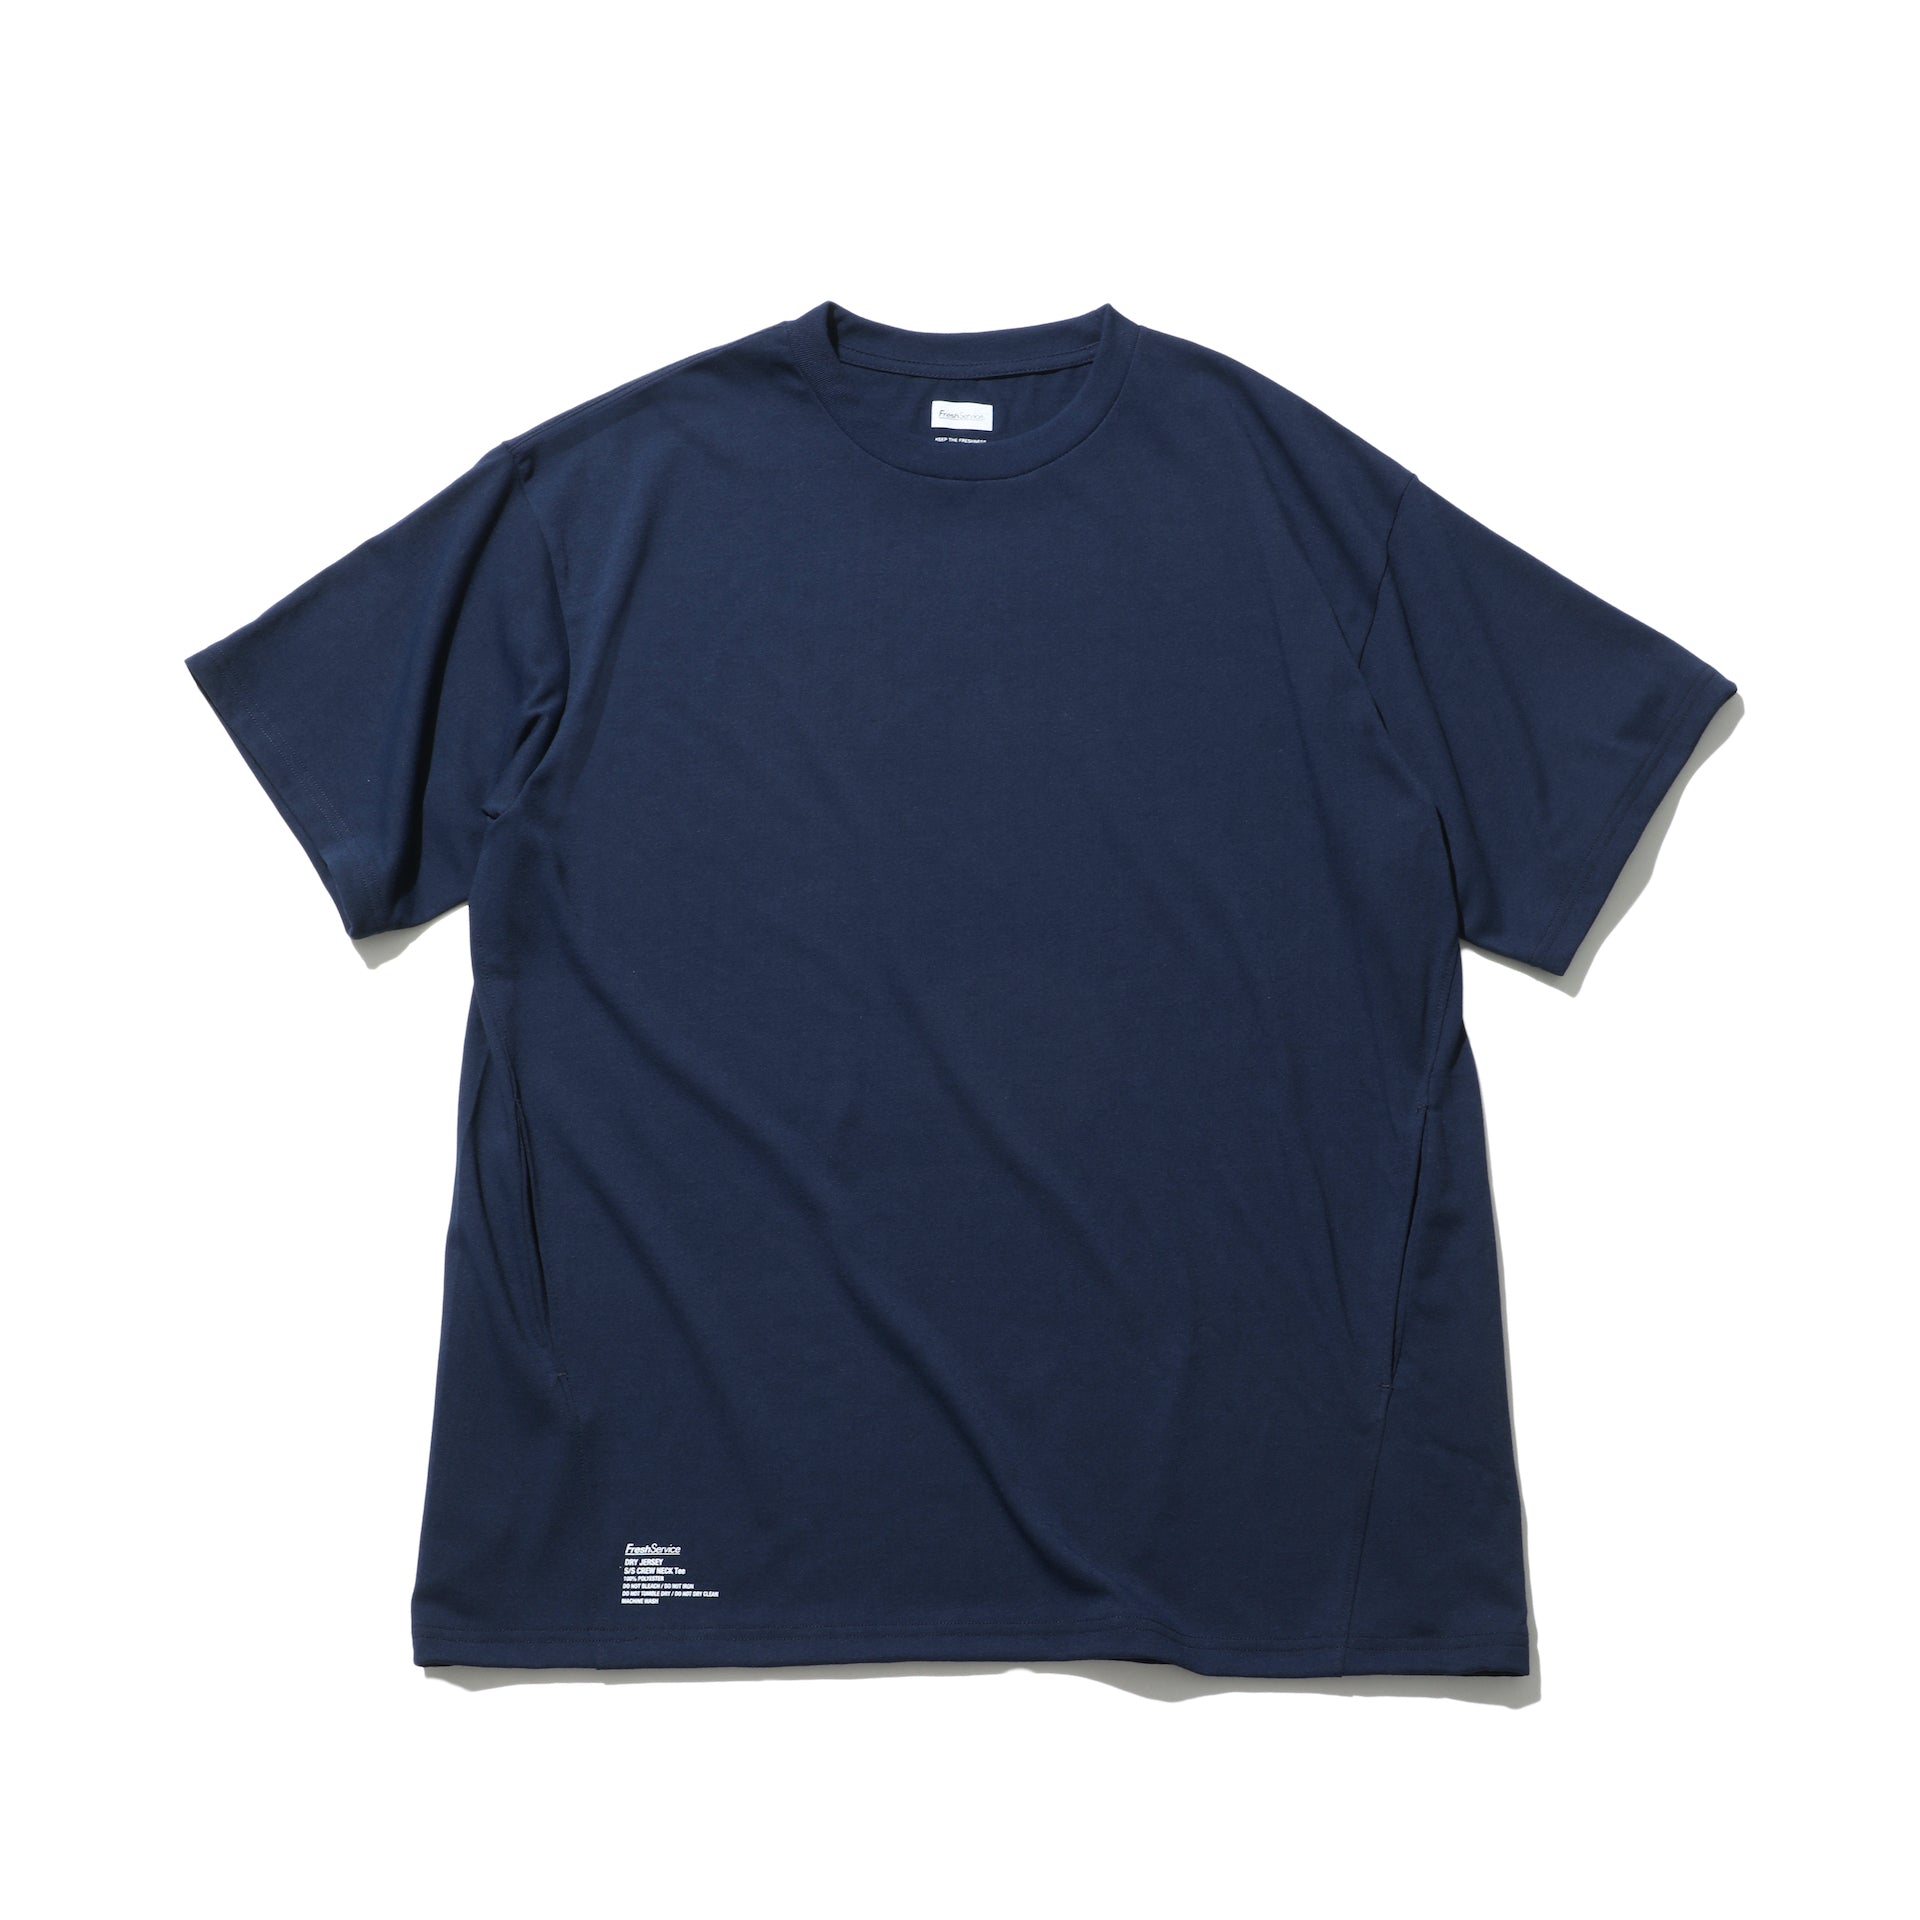 DRY JERSEY S/S CREW NECK TEE – FreshService® official site